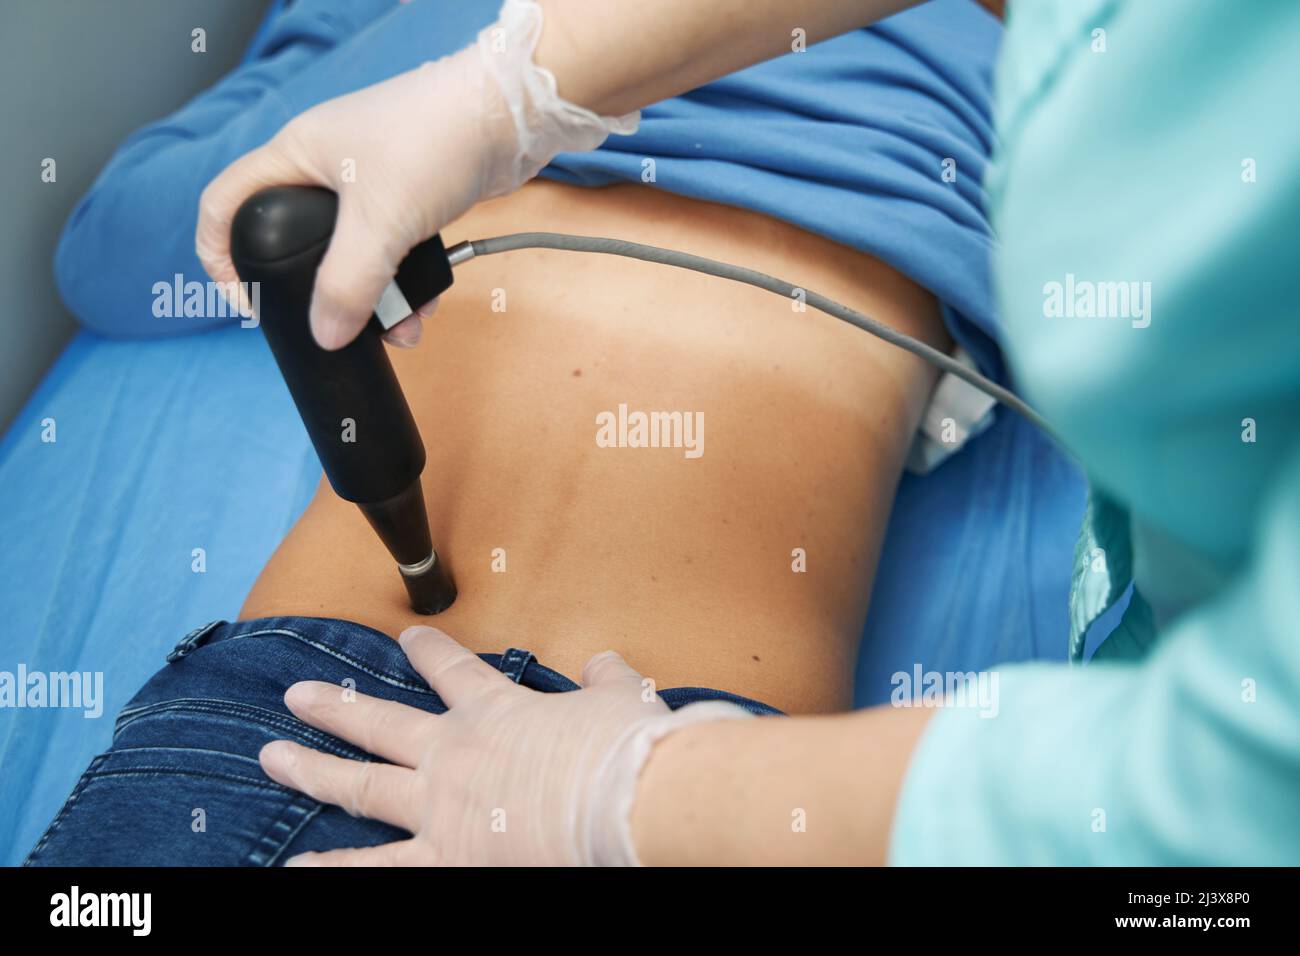 Female patient receiving extracorporeal shockwave therapy in clinic Stock Photo